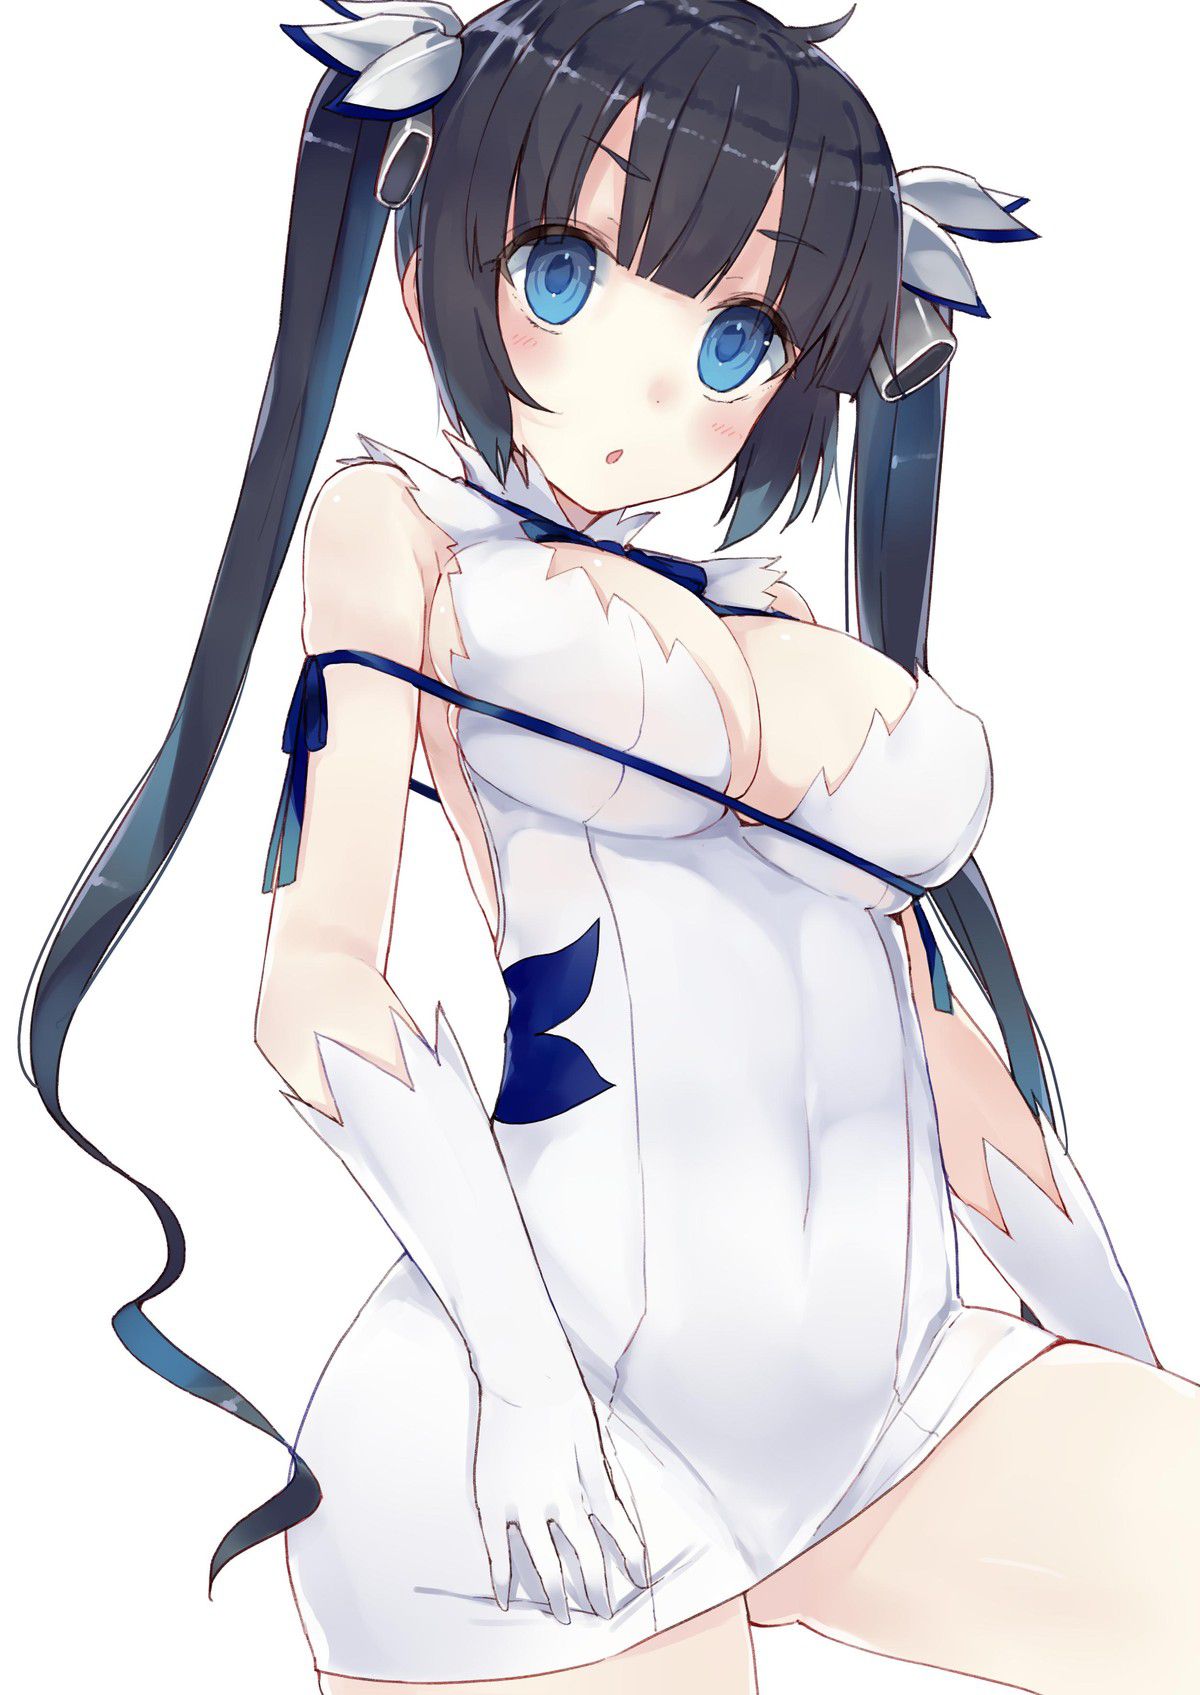 [Image] "Dan town ' to hshs in Hestia: Elo not illustrations of the www 12